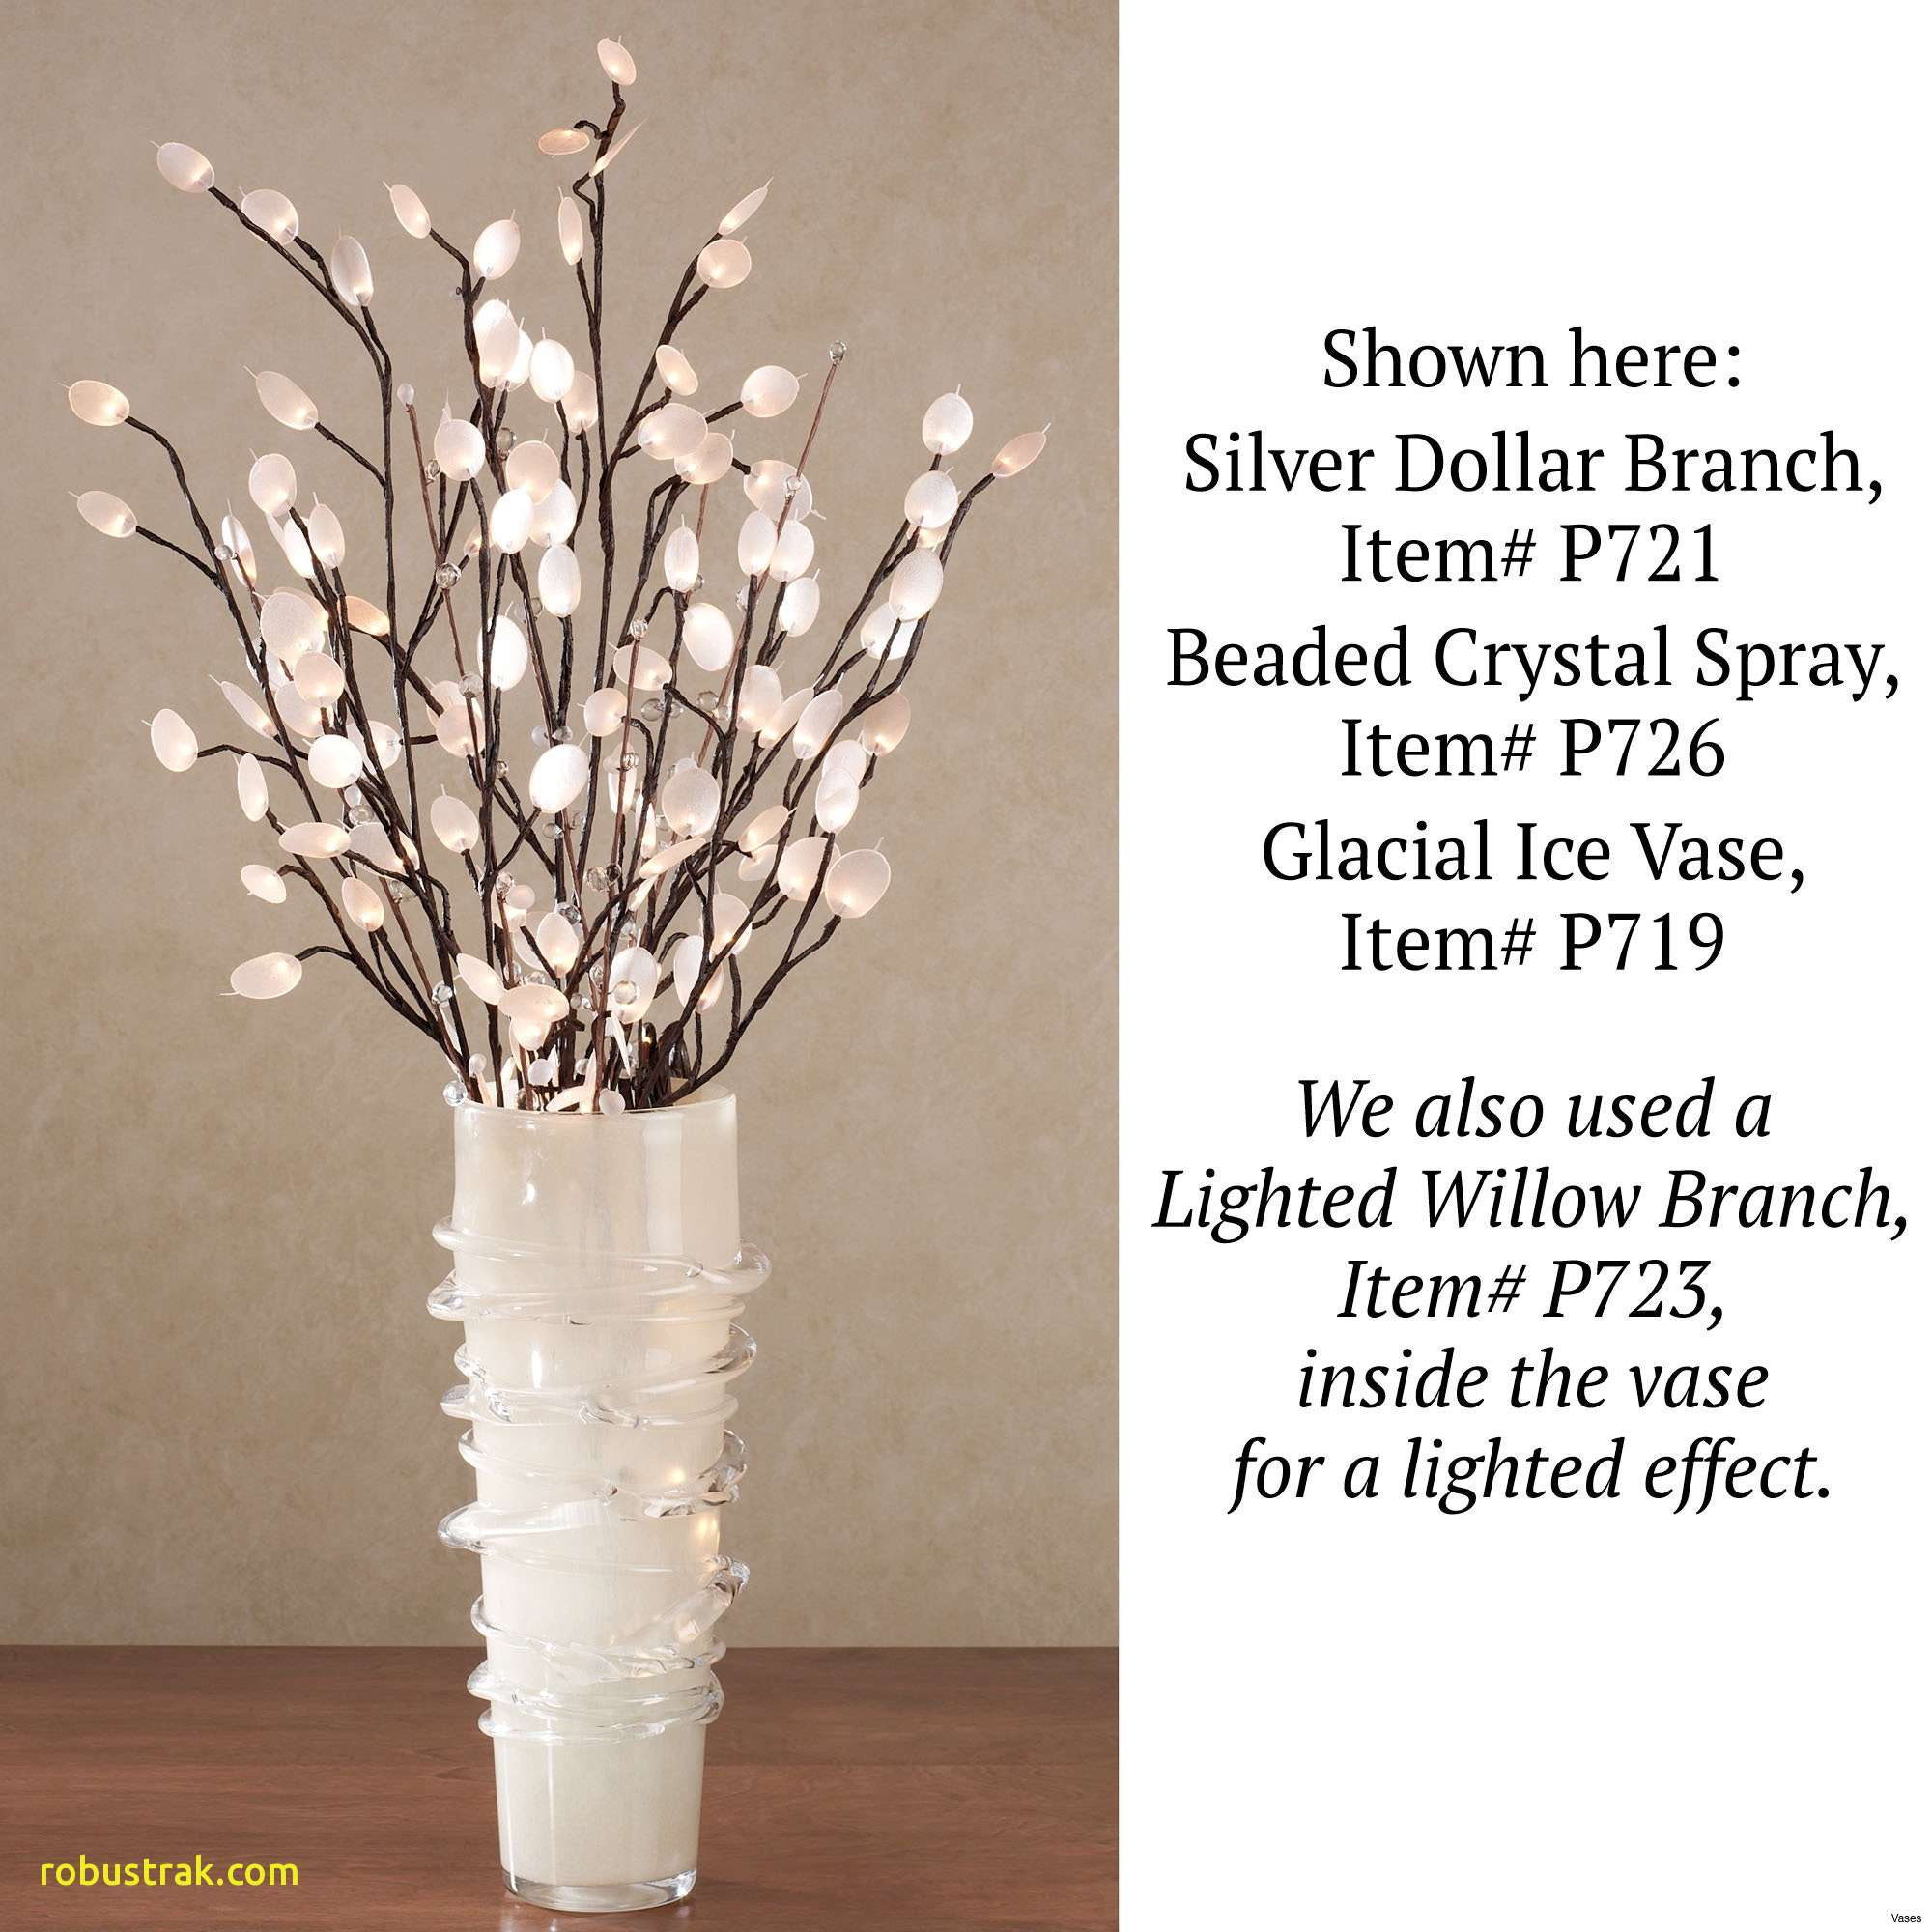 19 Spectacular Led Flowers In Vase 2024 free download led flowers in vase of inspirational decor sticks in a vase home design ideas for floor decor vase tall ideash vases with branches fill a substantial arrangement led it s another